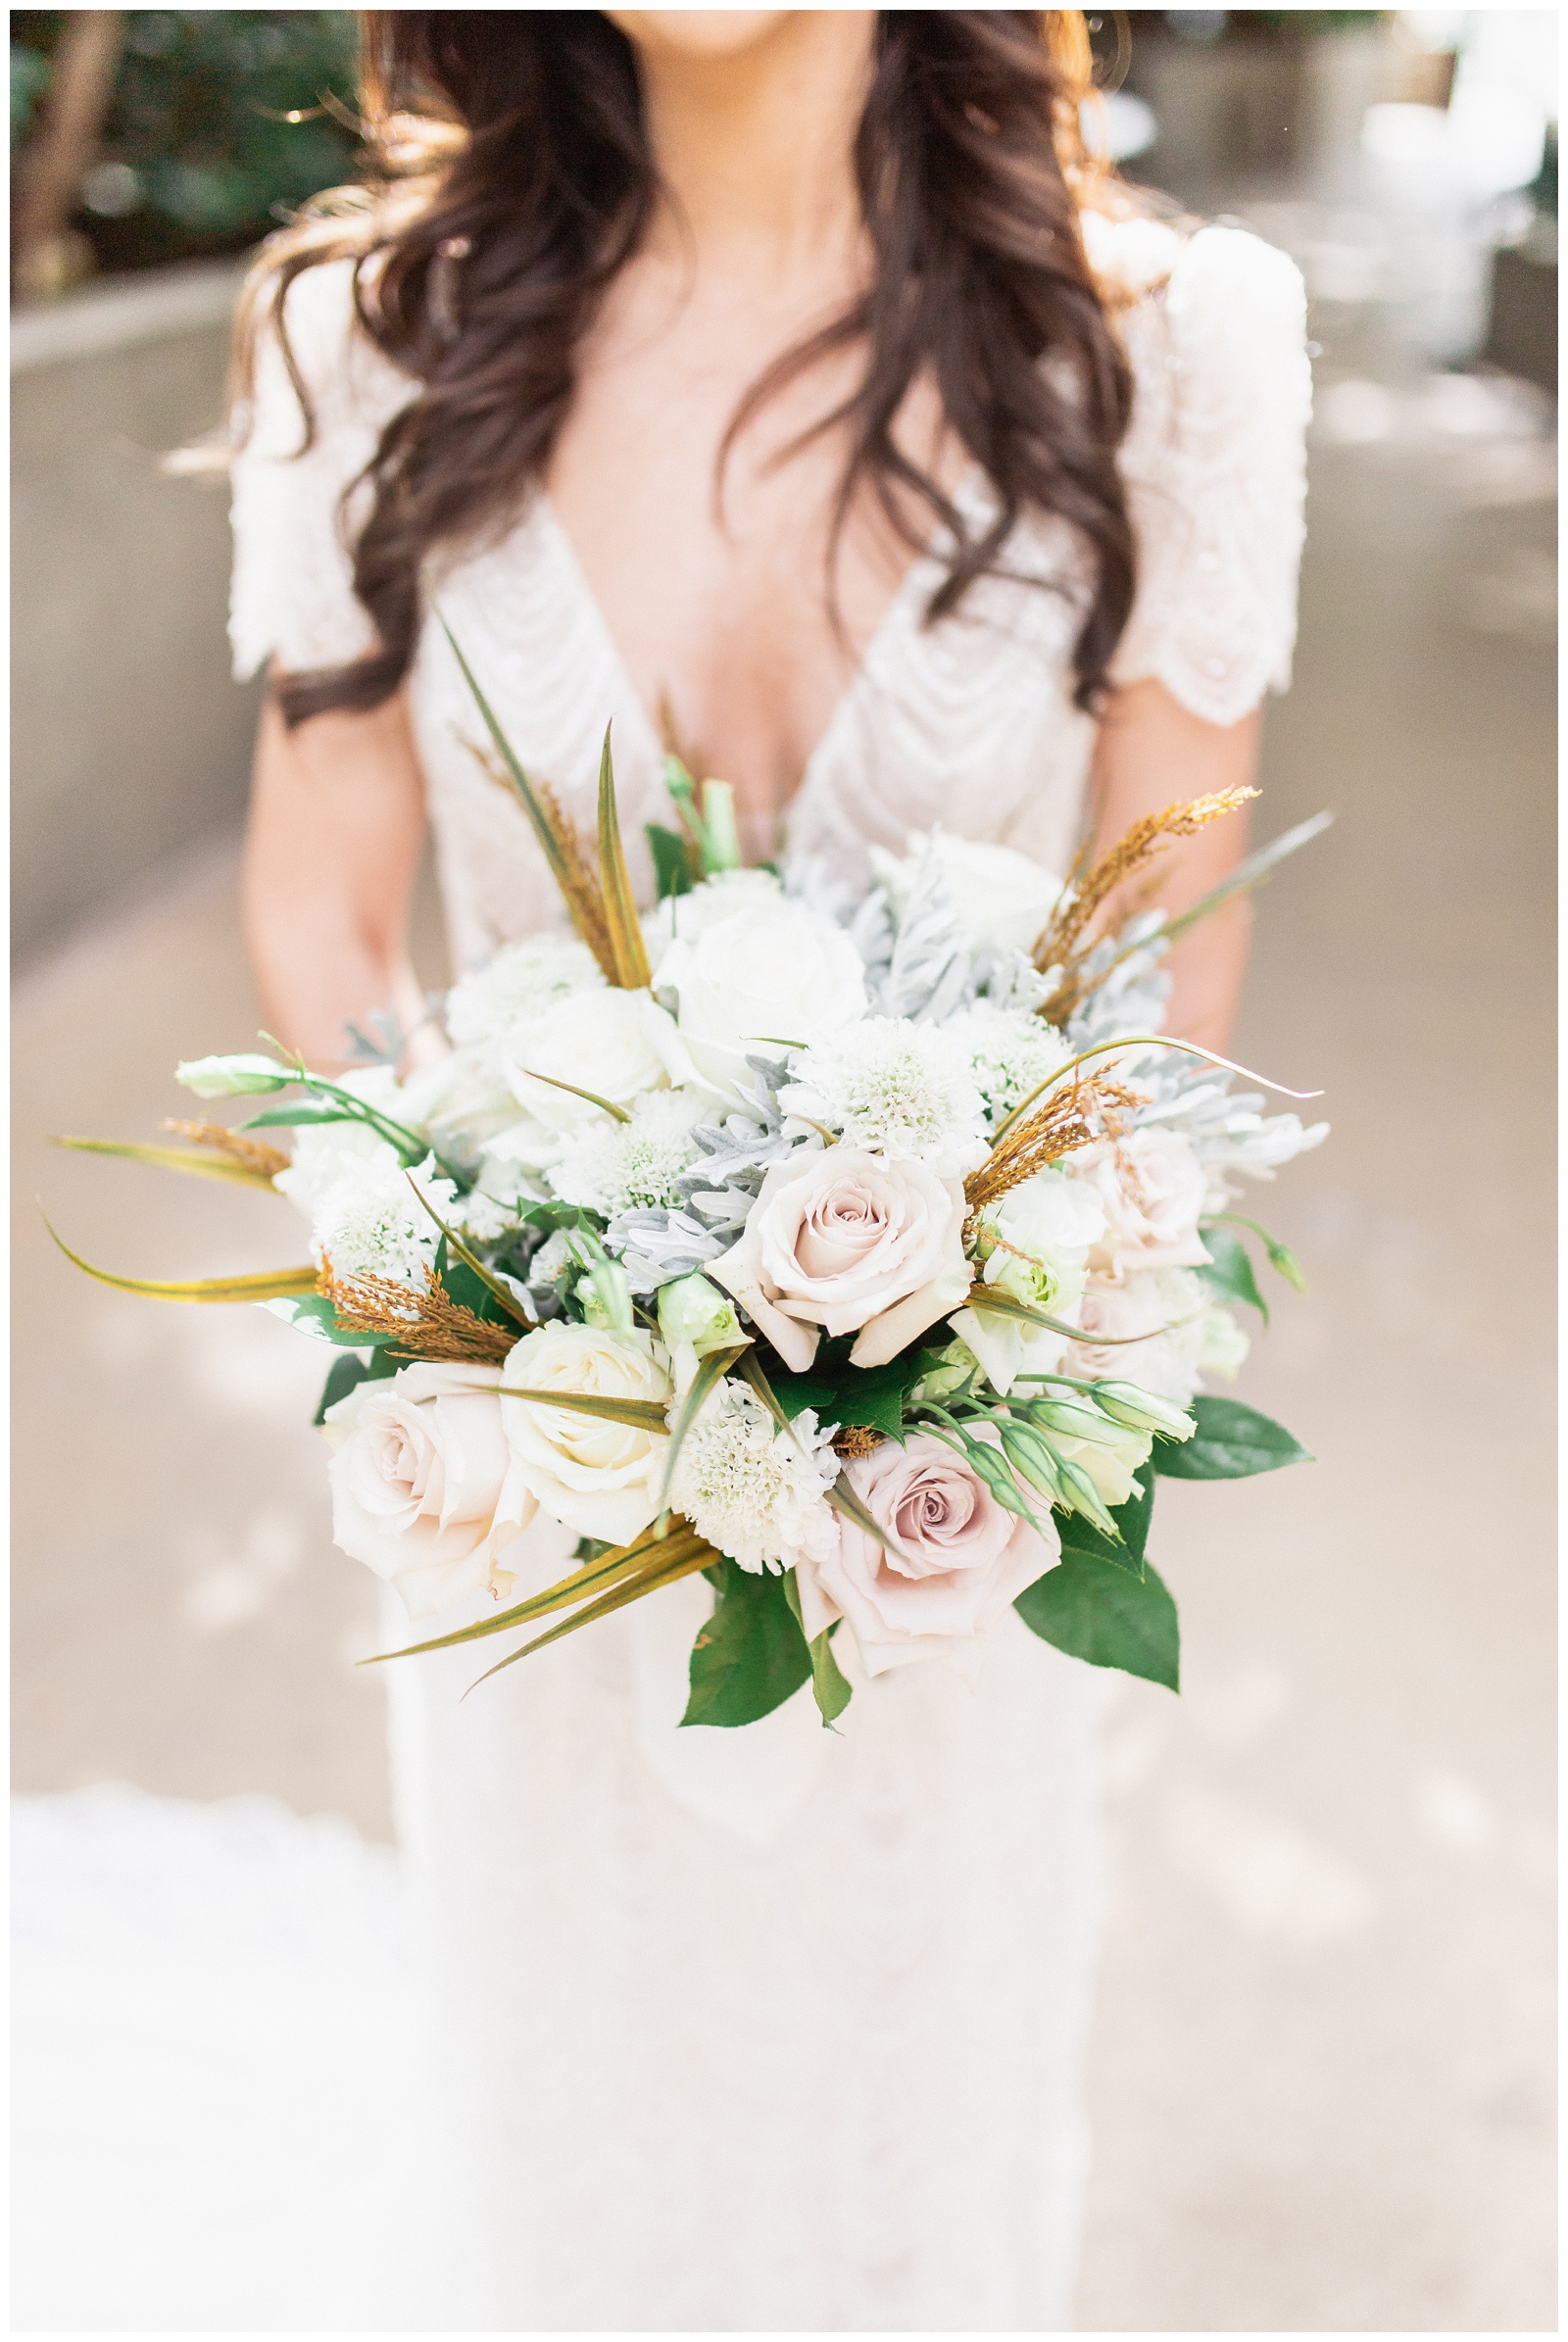 Close up of bride's bouquet | Matlock and Kelly Photography